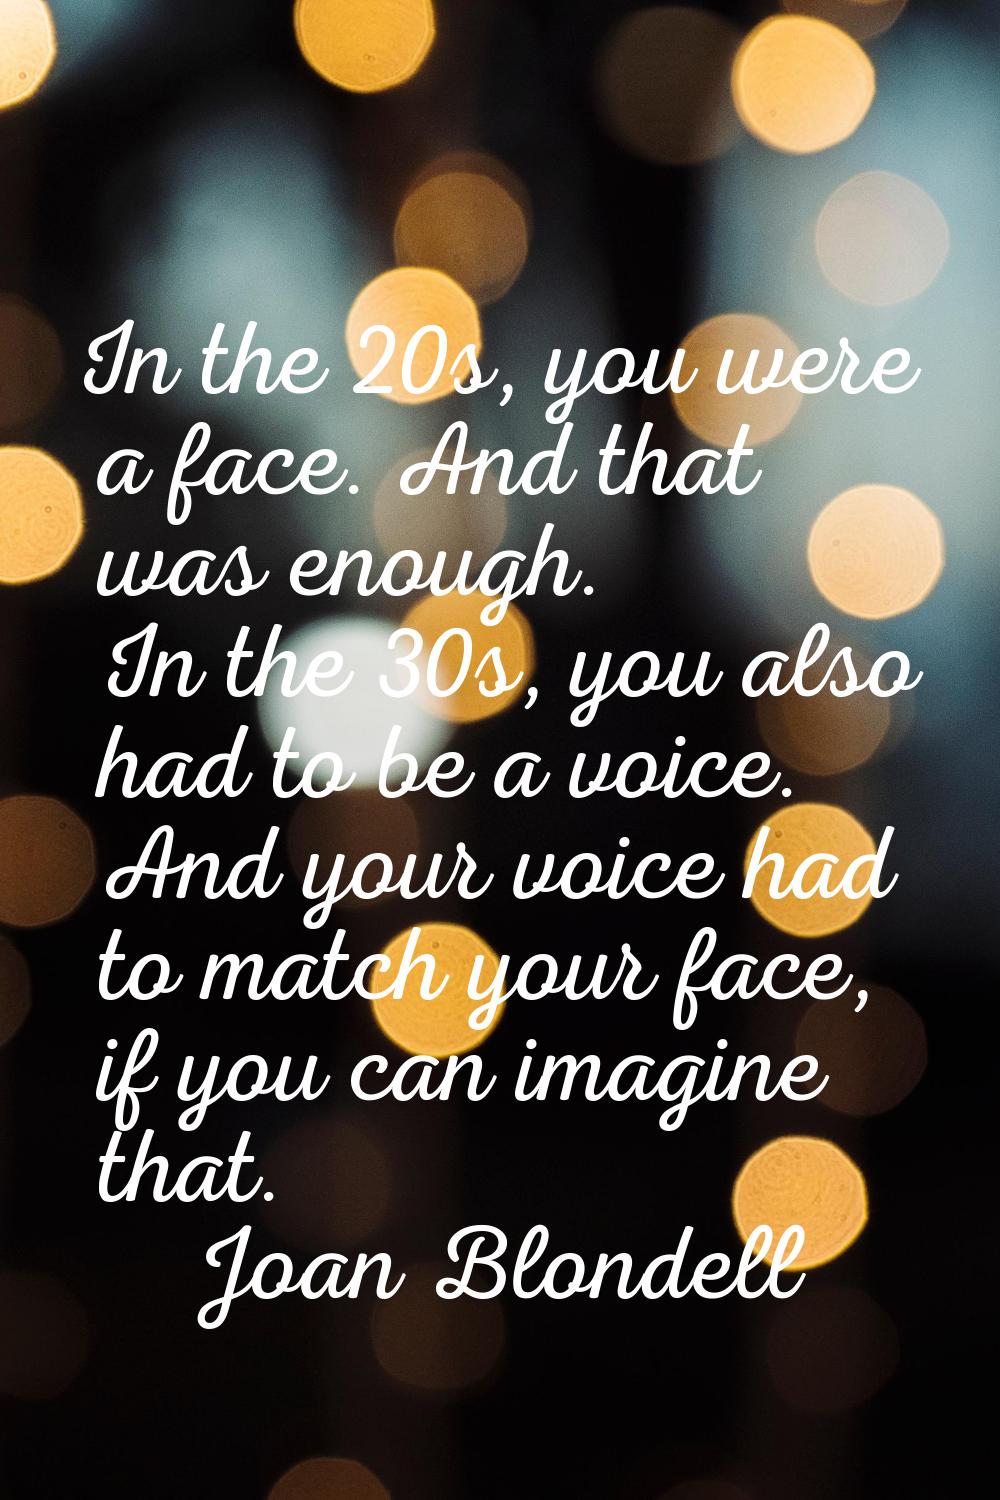 In the 20s, you were a face. And that was enough. In the 30s, you also had to be a voice. And your 